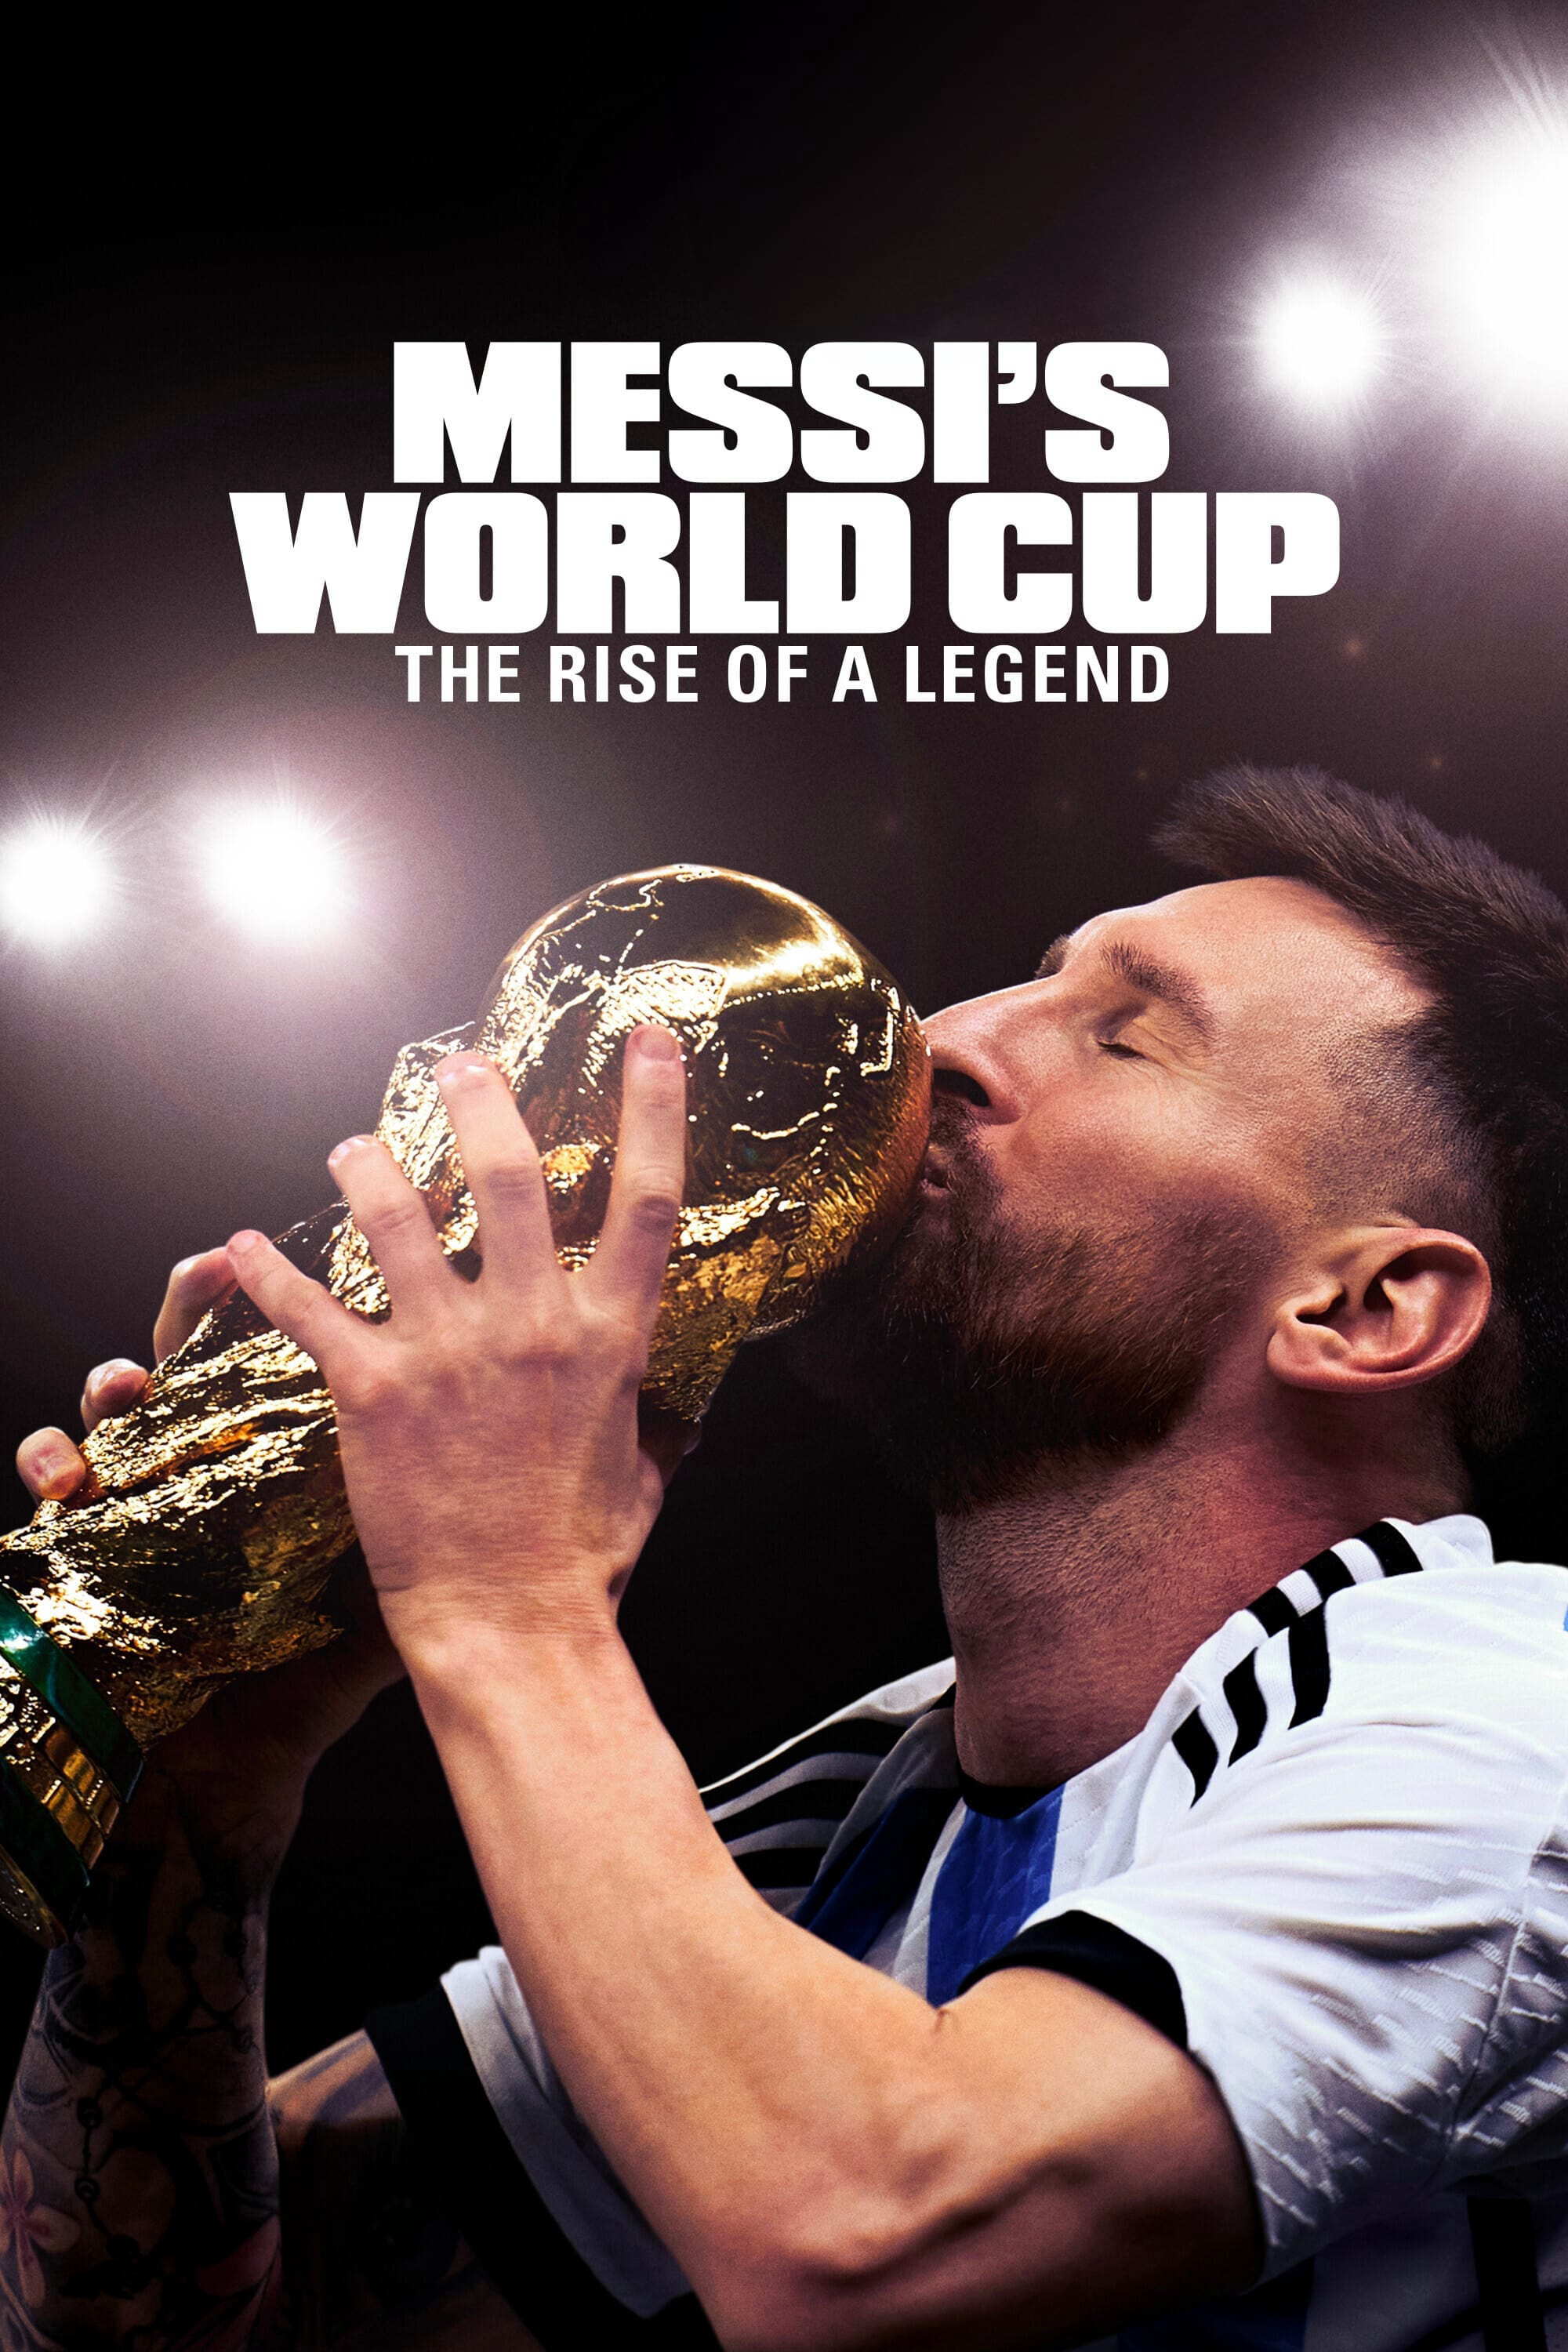 Poster Phim Kỳ World Cup Của Messi: Huyền Thoại Tỏa Sáng - Messi's World Cup: The Rise of a Legend (Messi's World Cup: The Rise of a Legend)